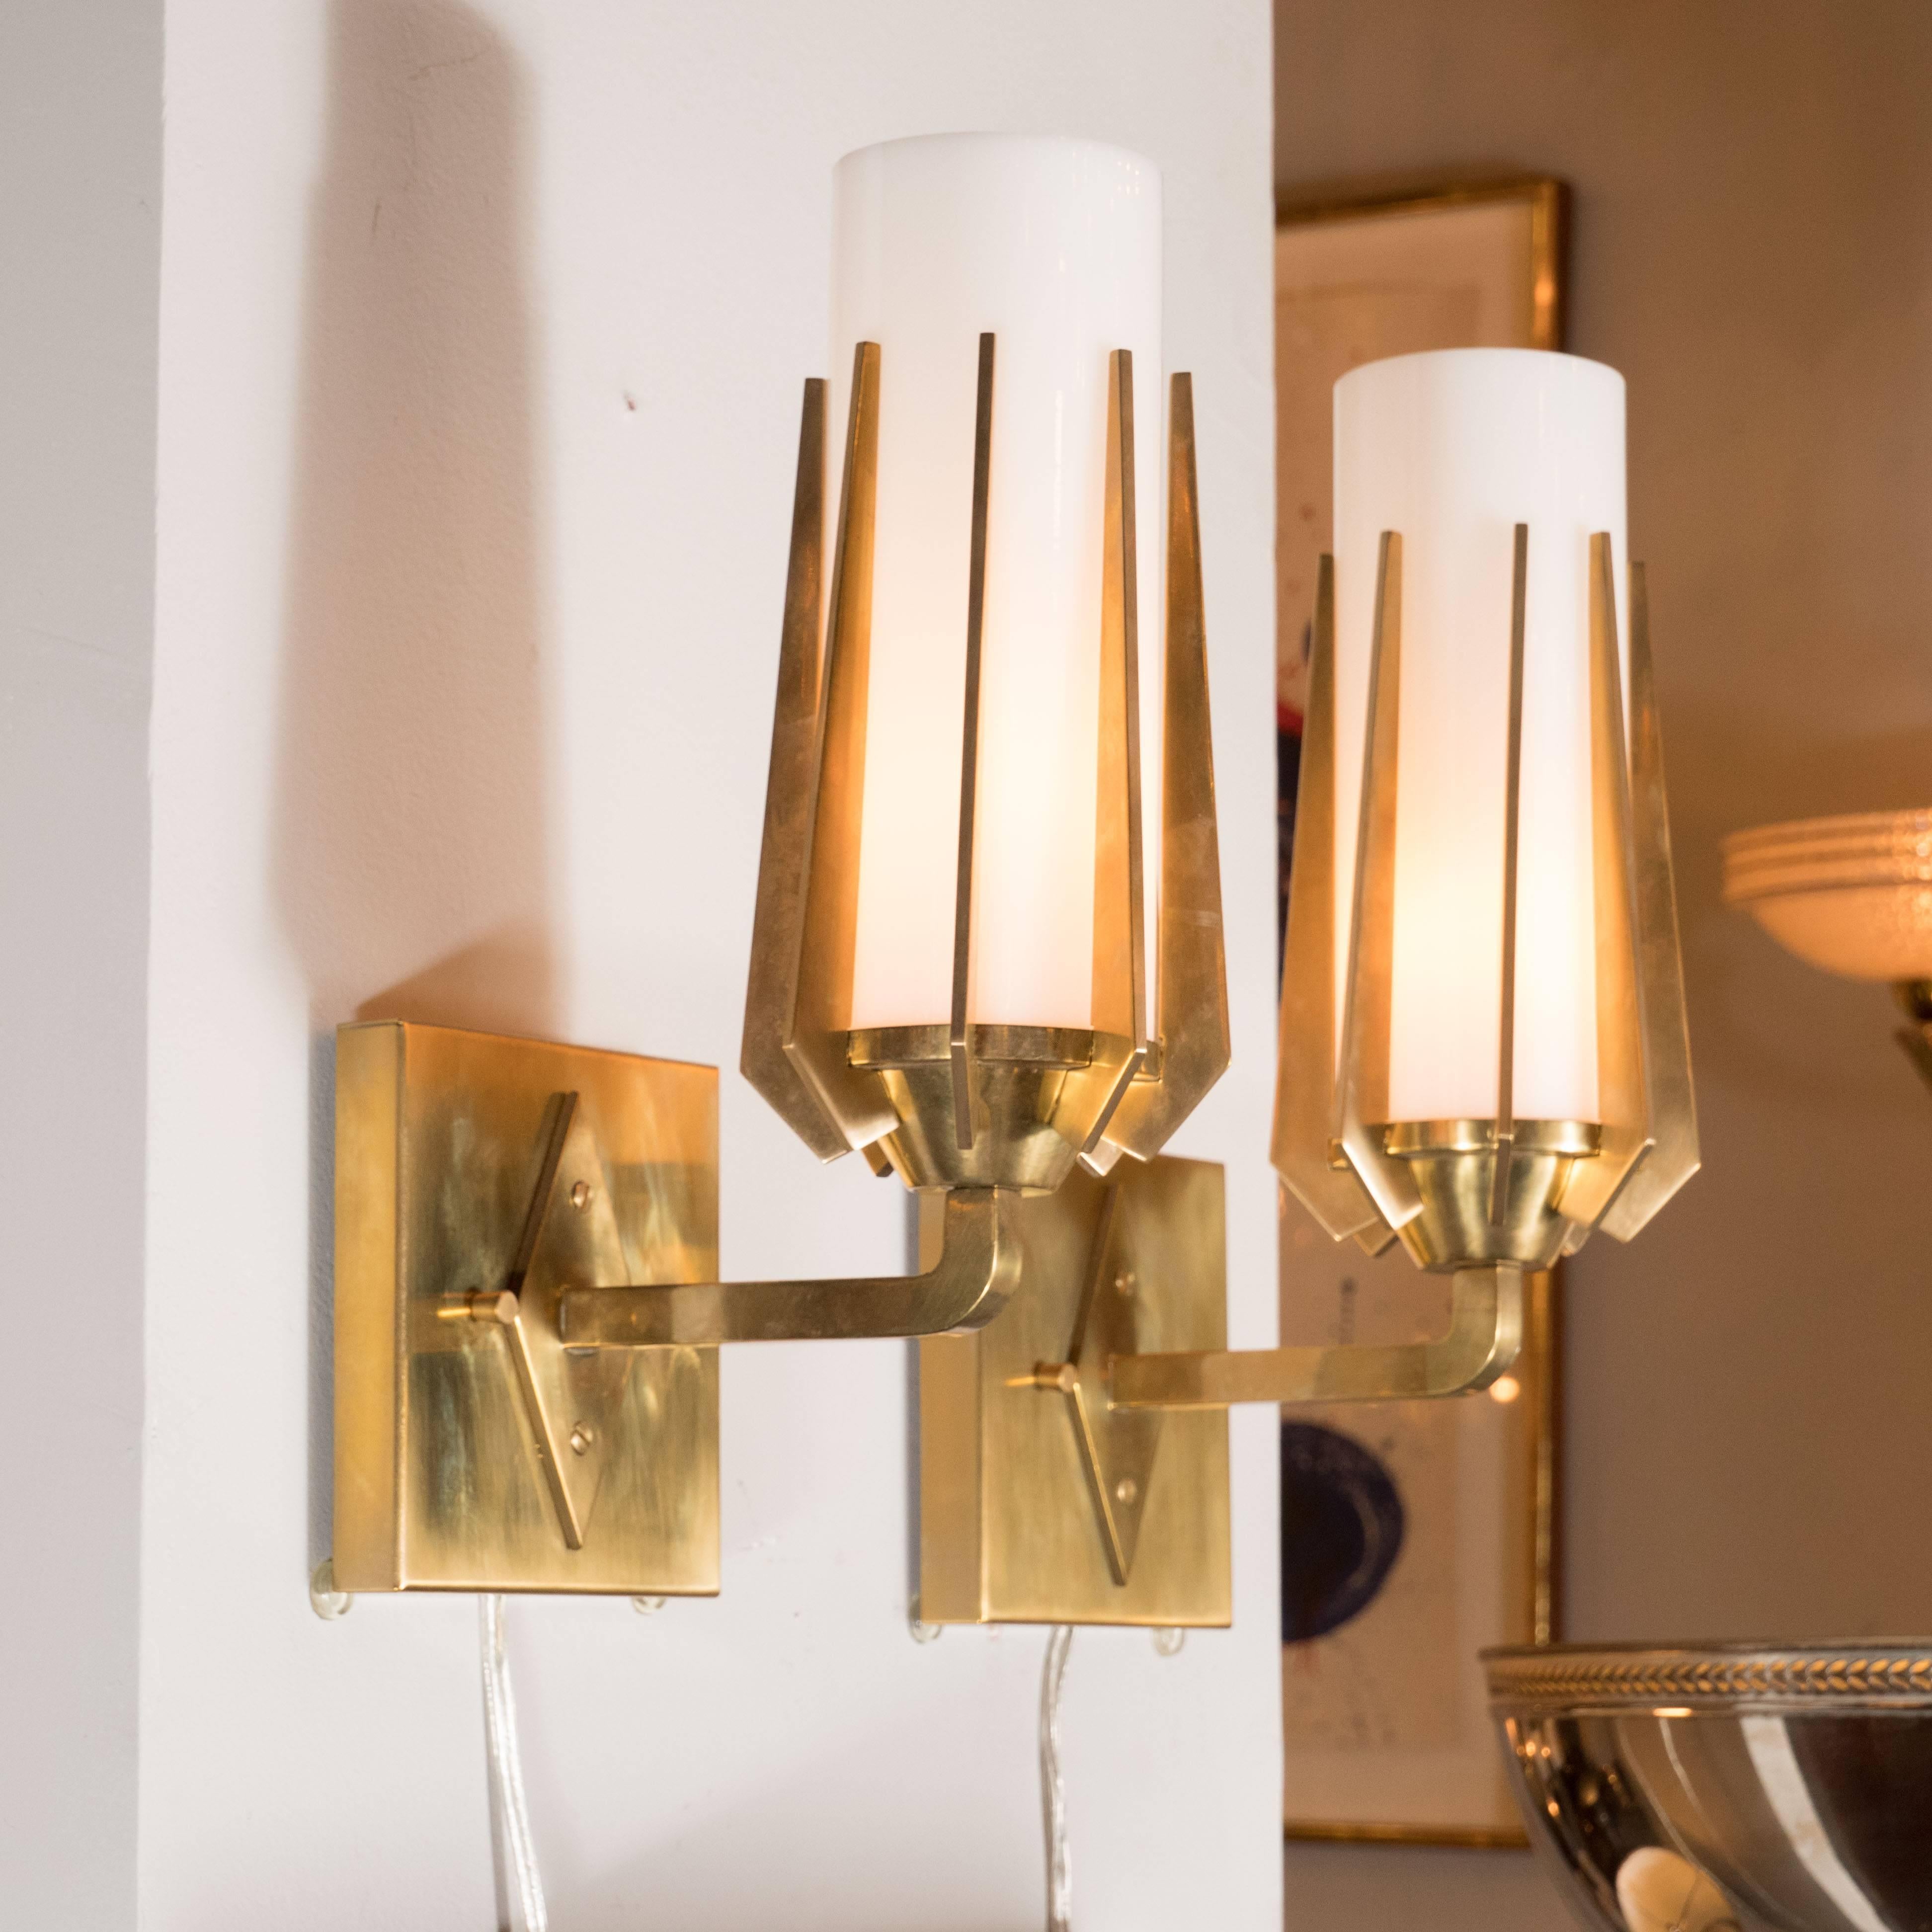 Mid-20th Century Pair of Midcentury Sconces in Brass and White Glass in the Manner of Gio Ponti